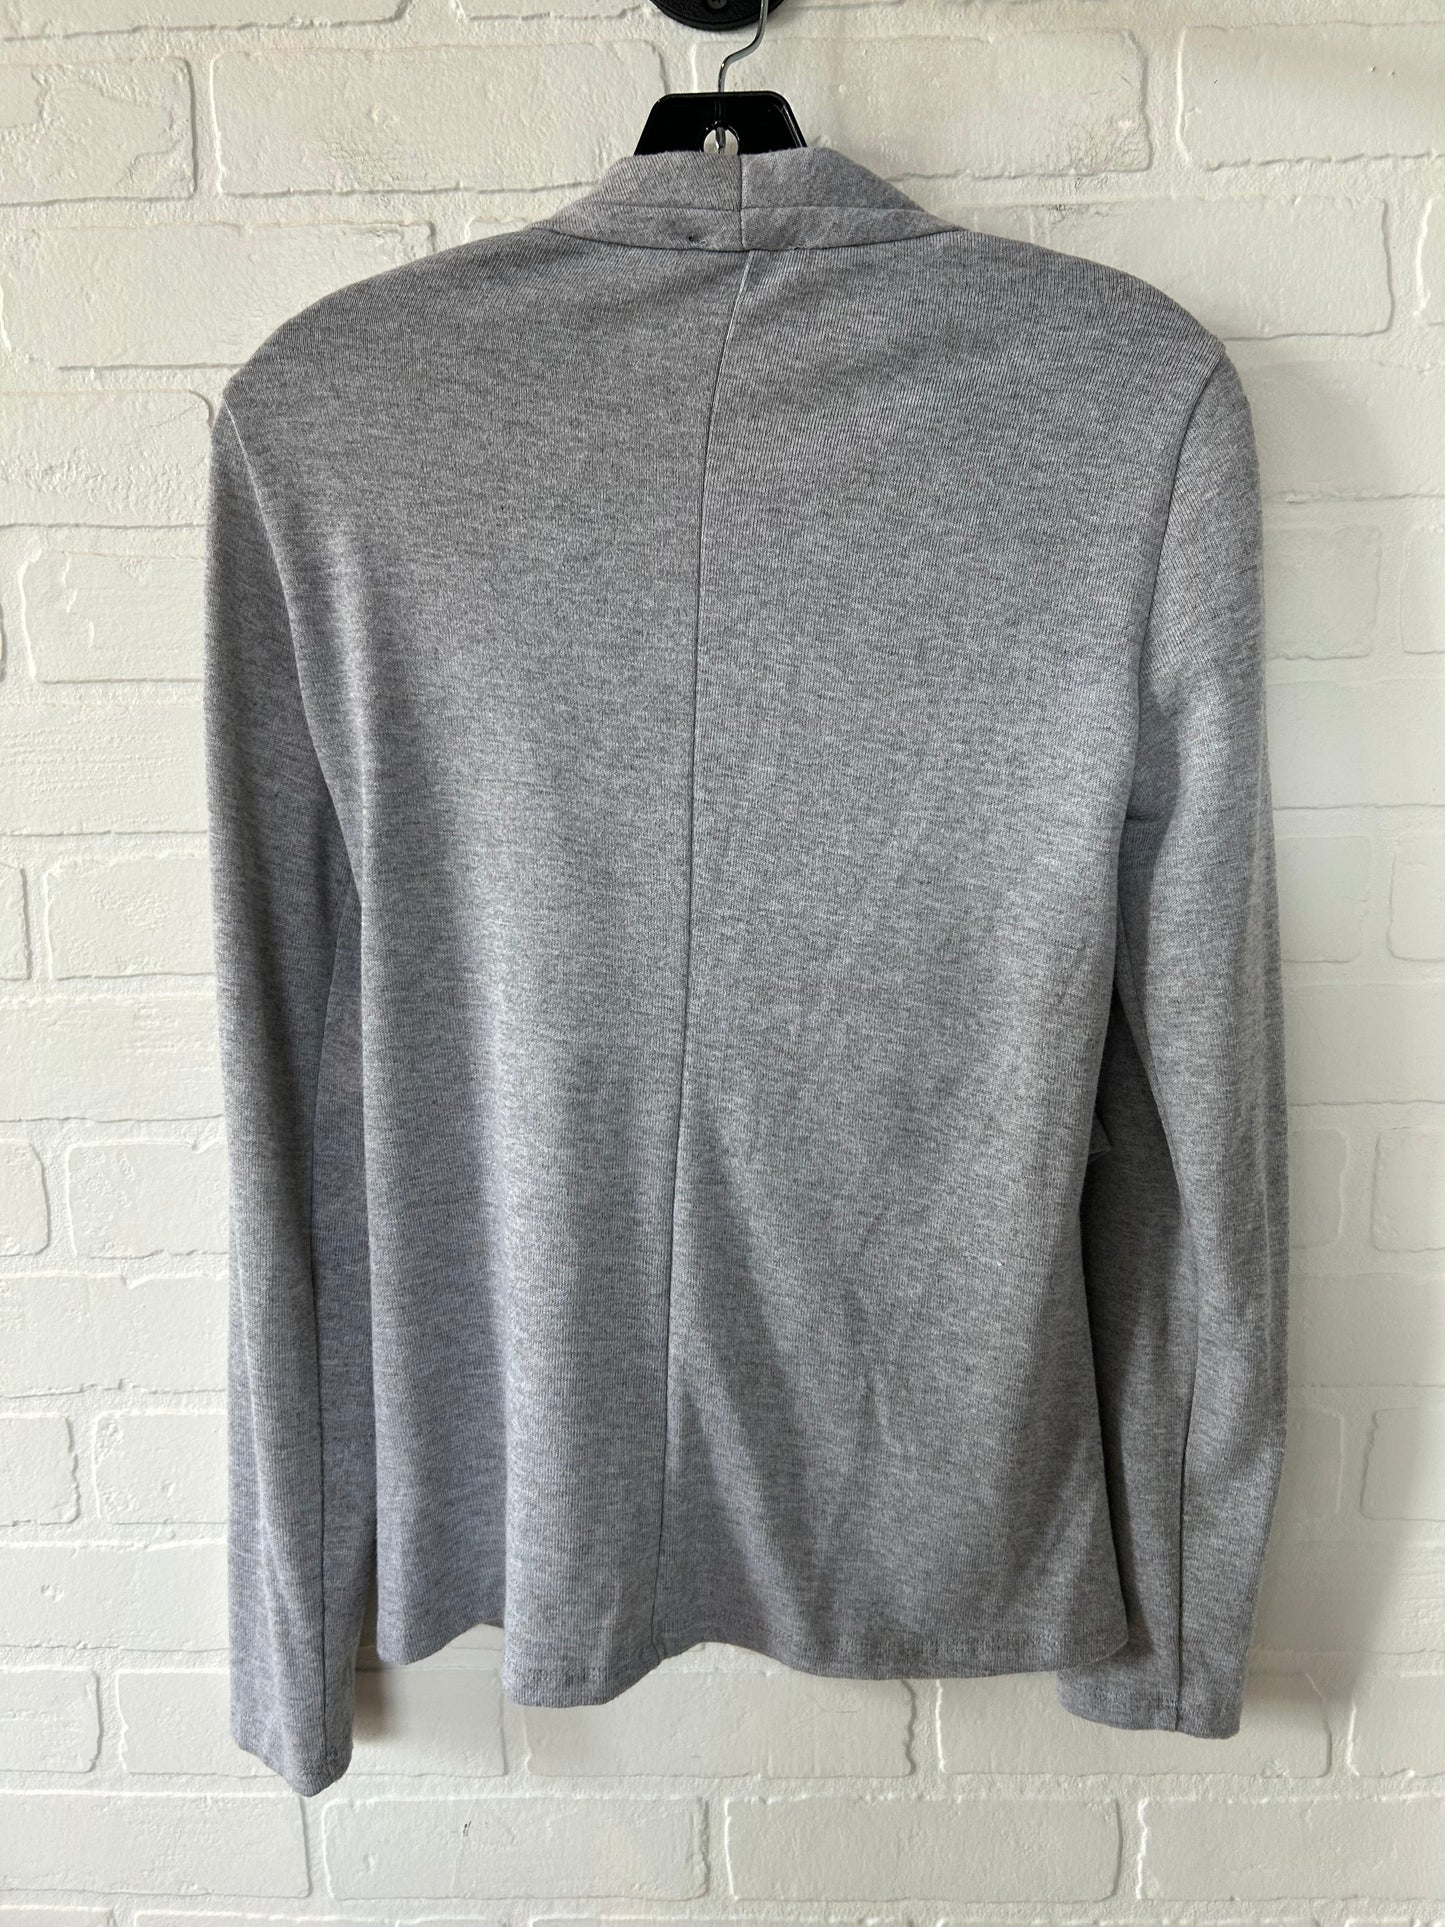 Grey Top Long Sleeve 1.state, Size S